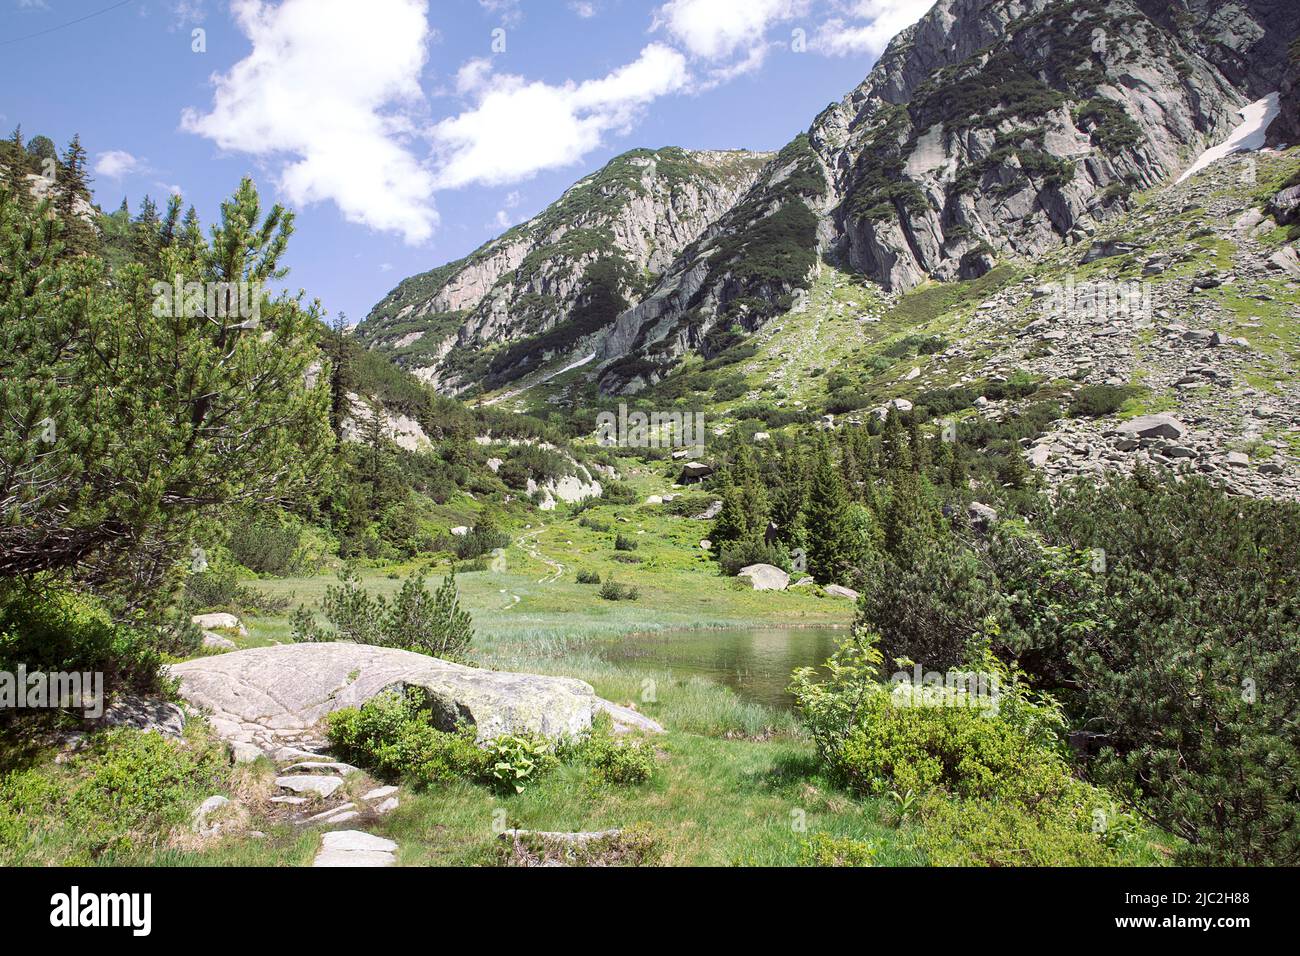 Summer alps mountain, hiking trail with beautiful landscape and small lake. Green nature in high mountains. Stock Photo